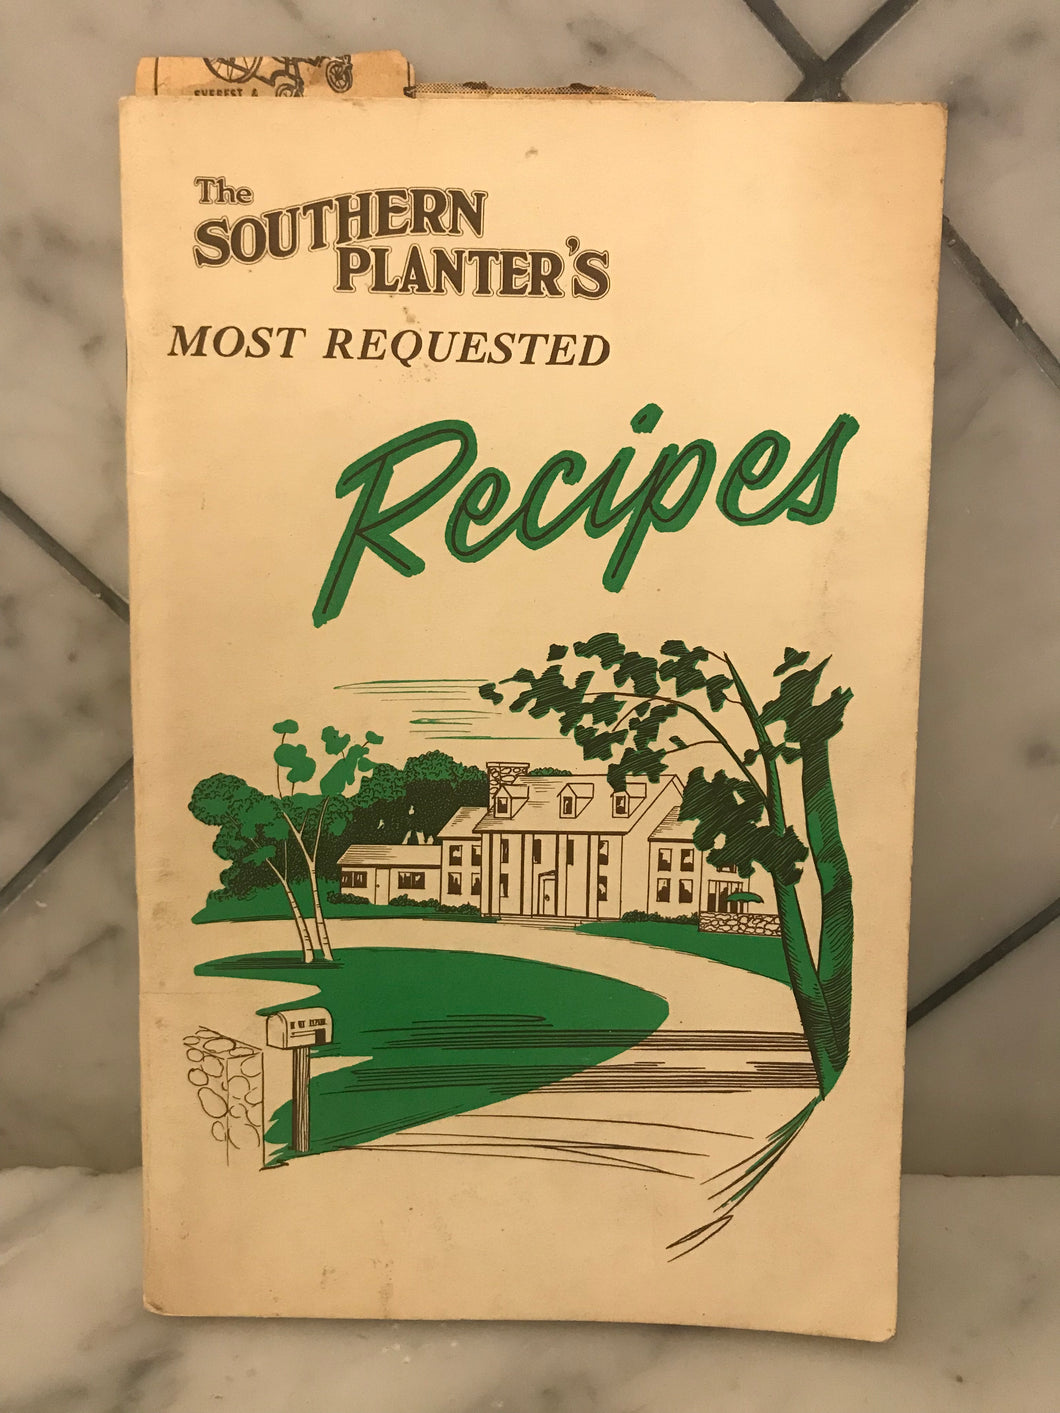 The Southern Planter's Most Requested Recipes